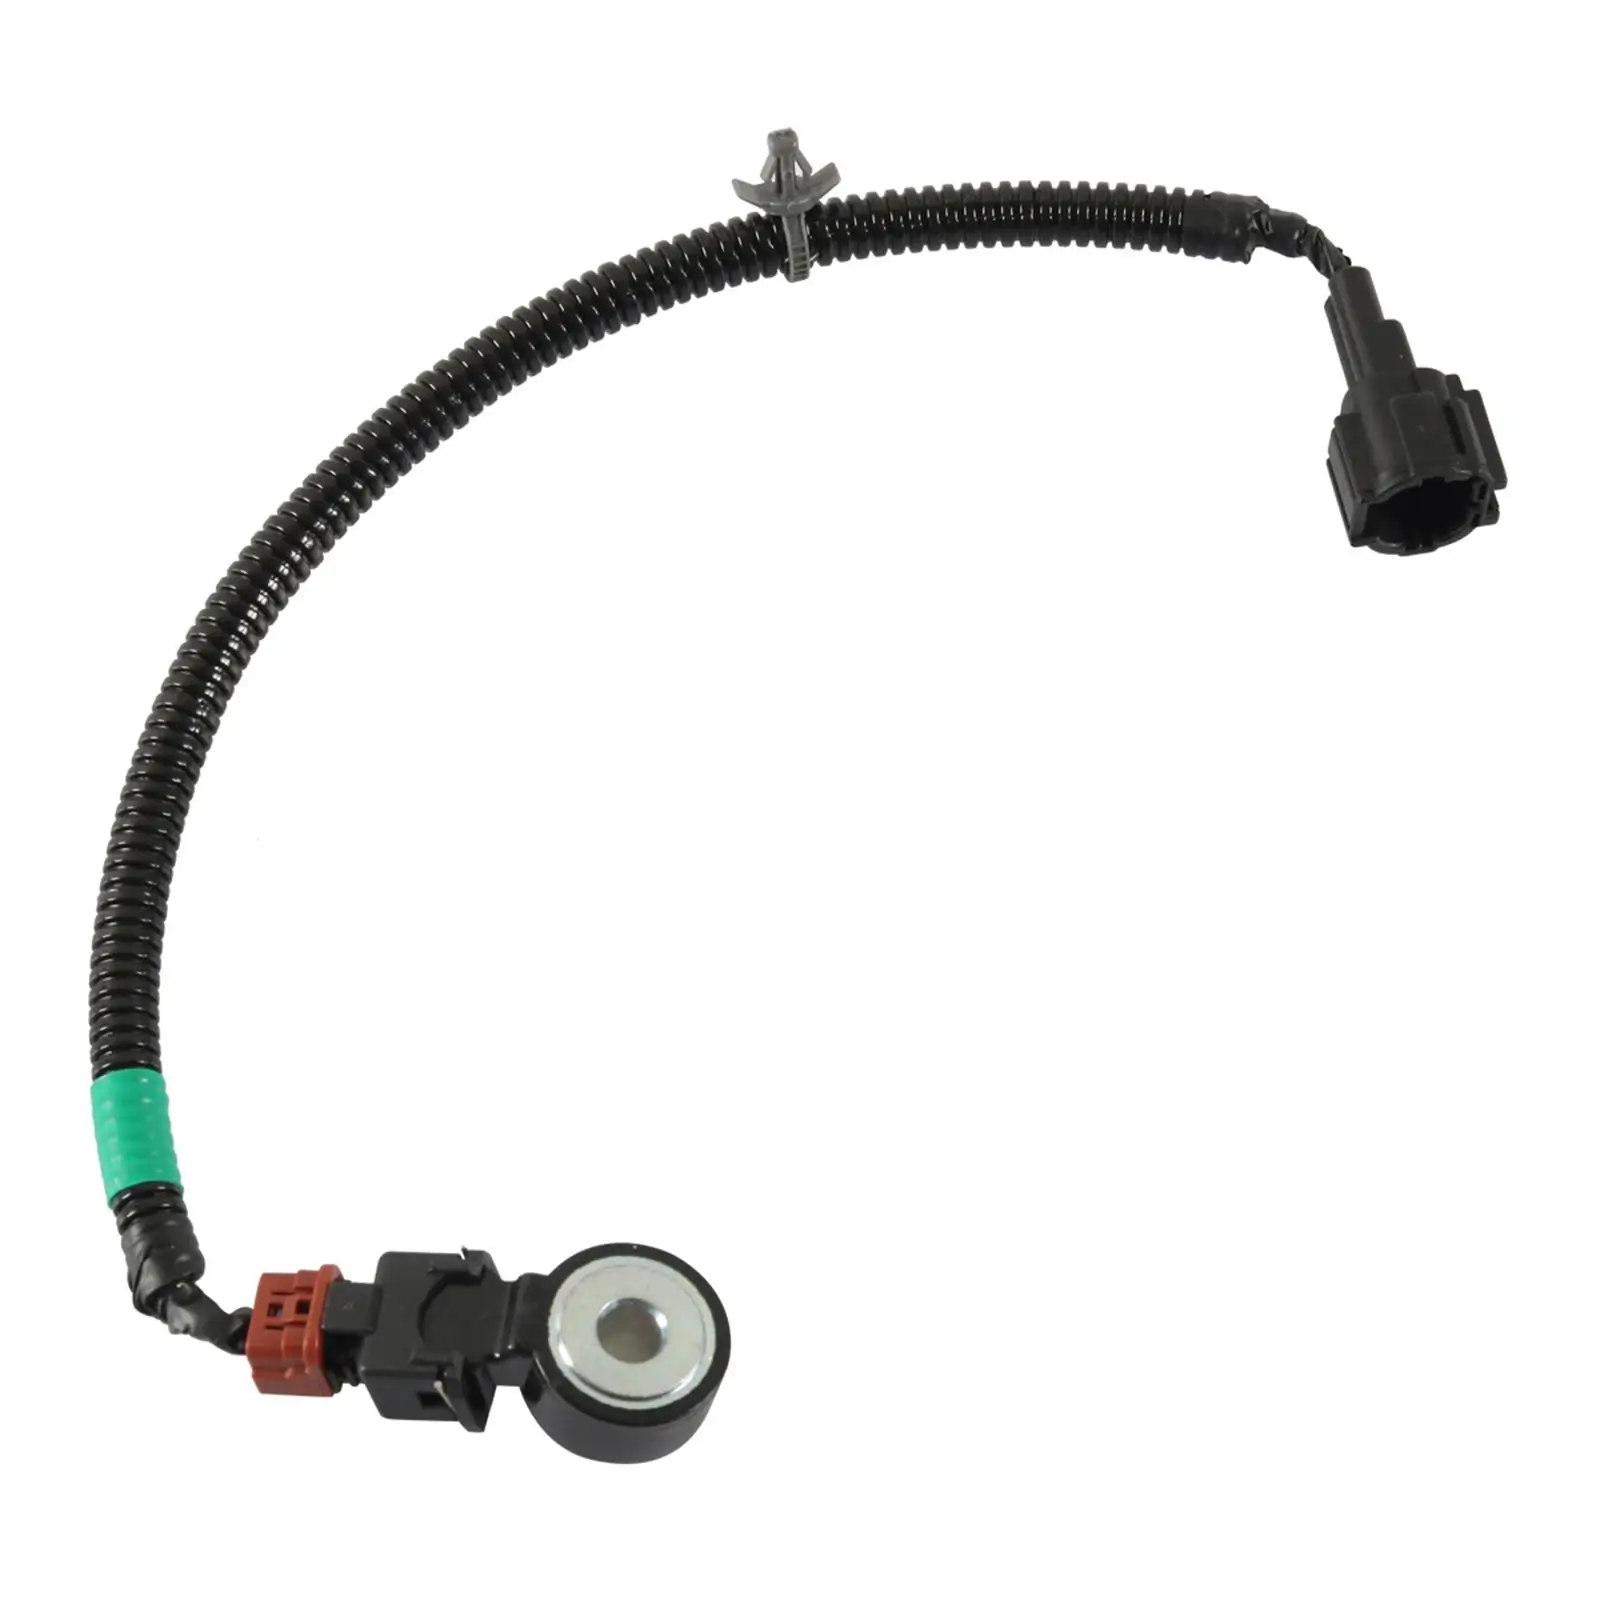 Knock Sensor and Wiring Harness 2407931U01 Fit for QX4 Replace Accessories